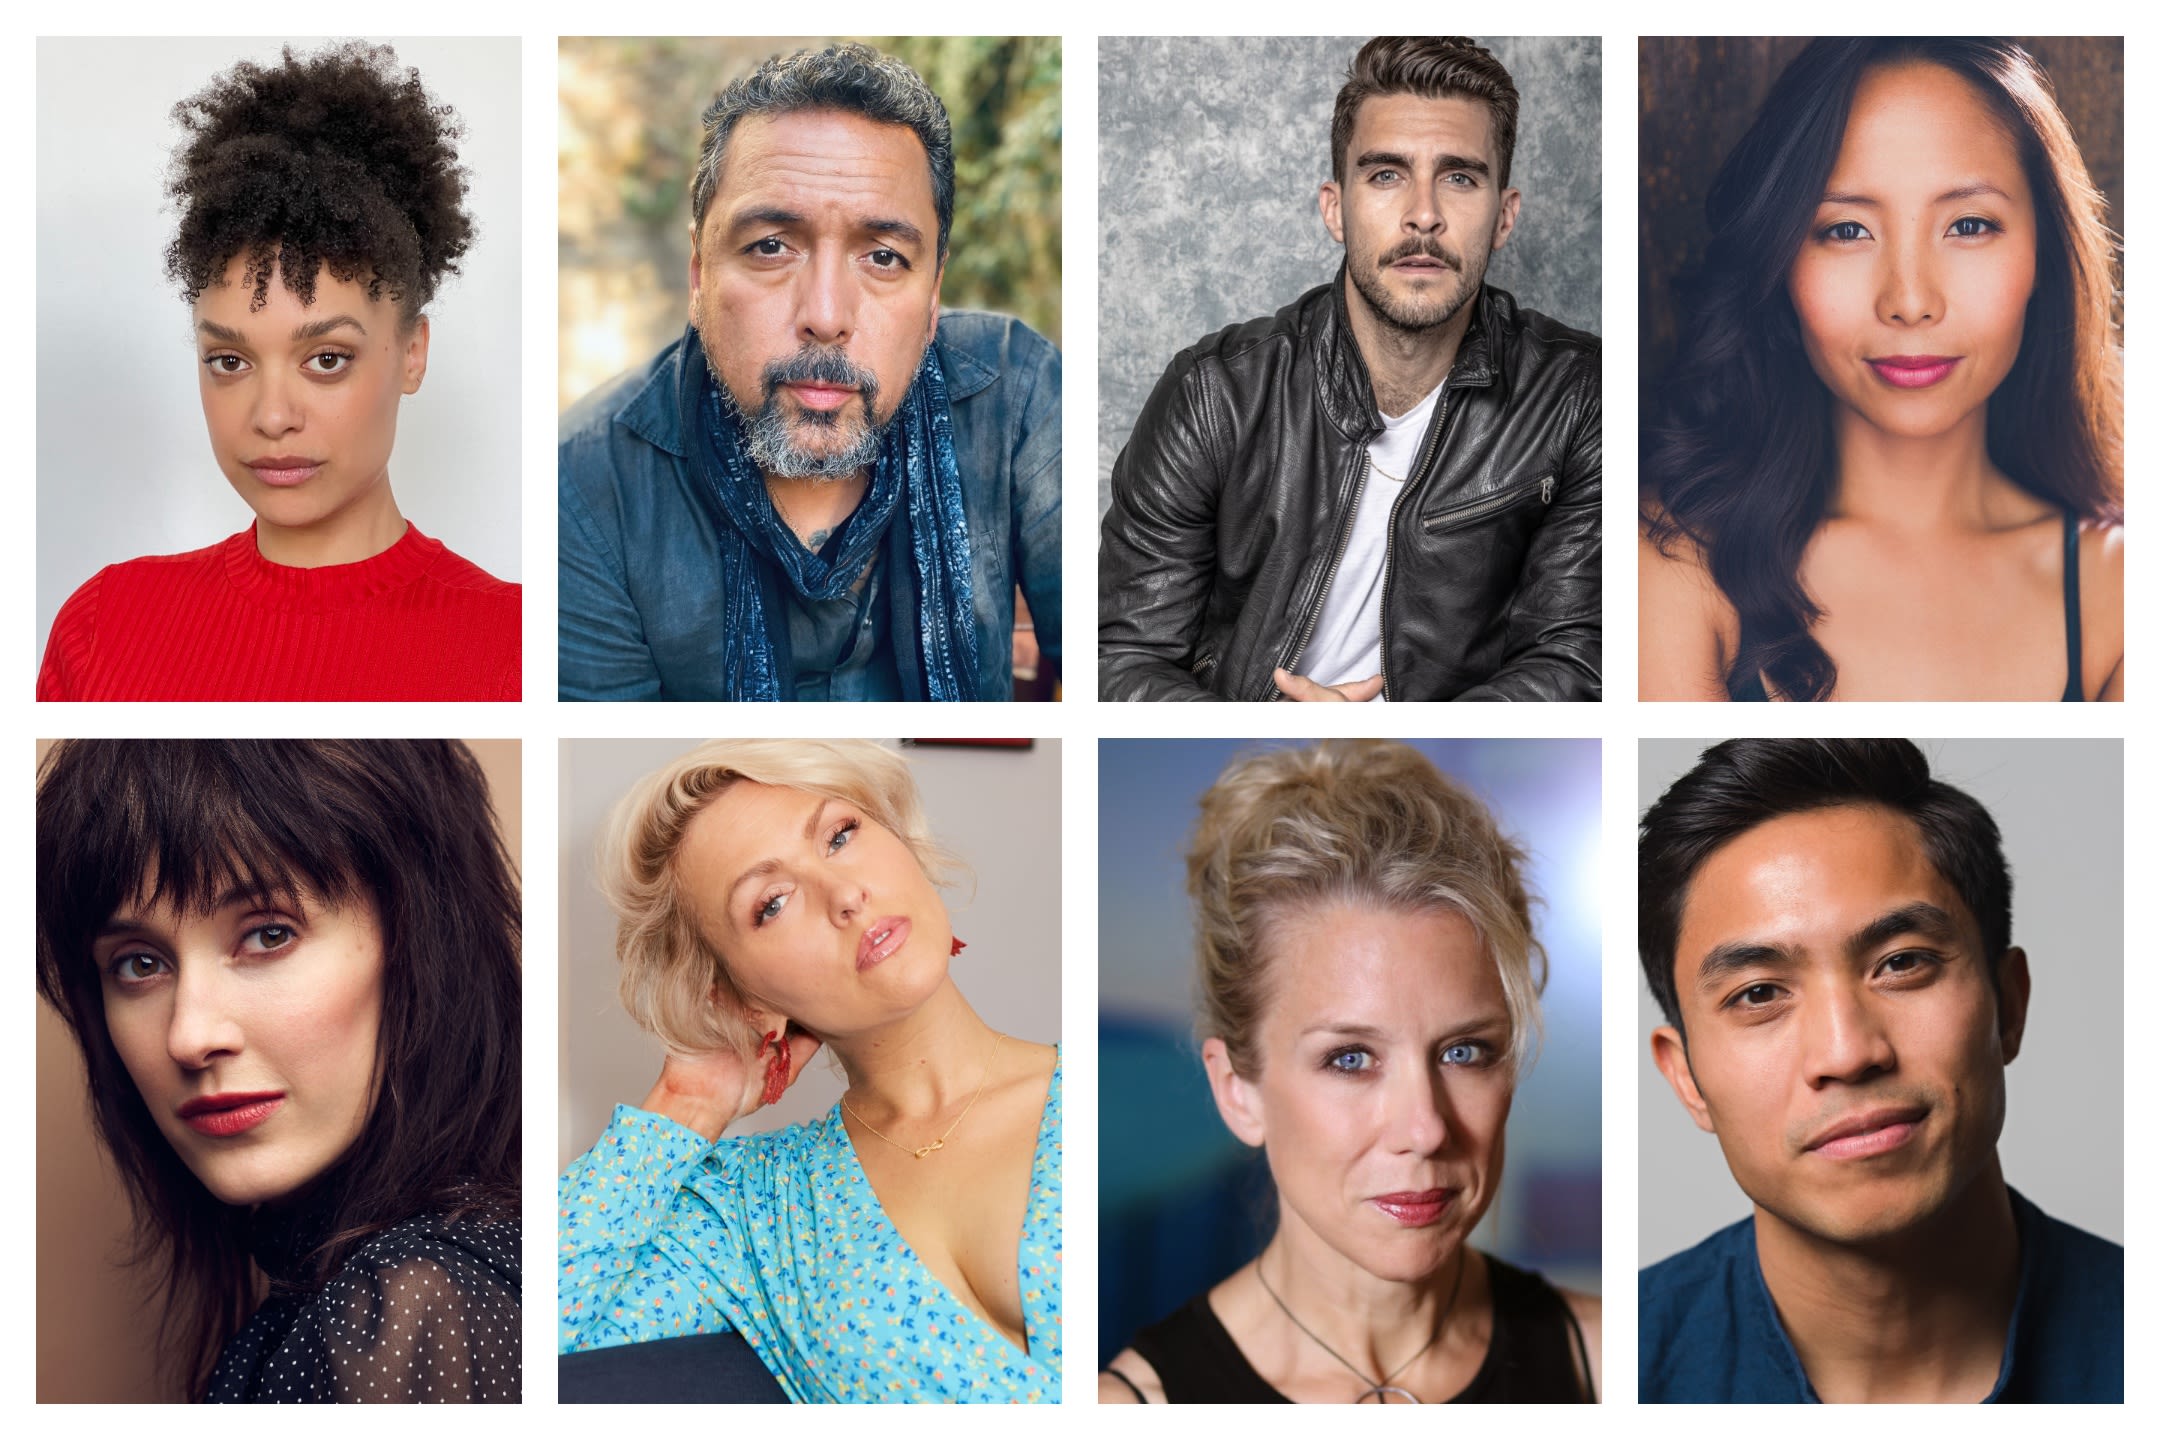 Netflix Limited Series ‘Sirens’ Rounds Out Main Cast With Eight Additions